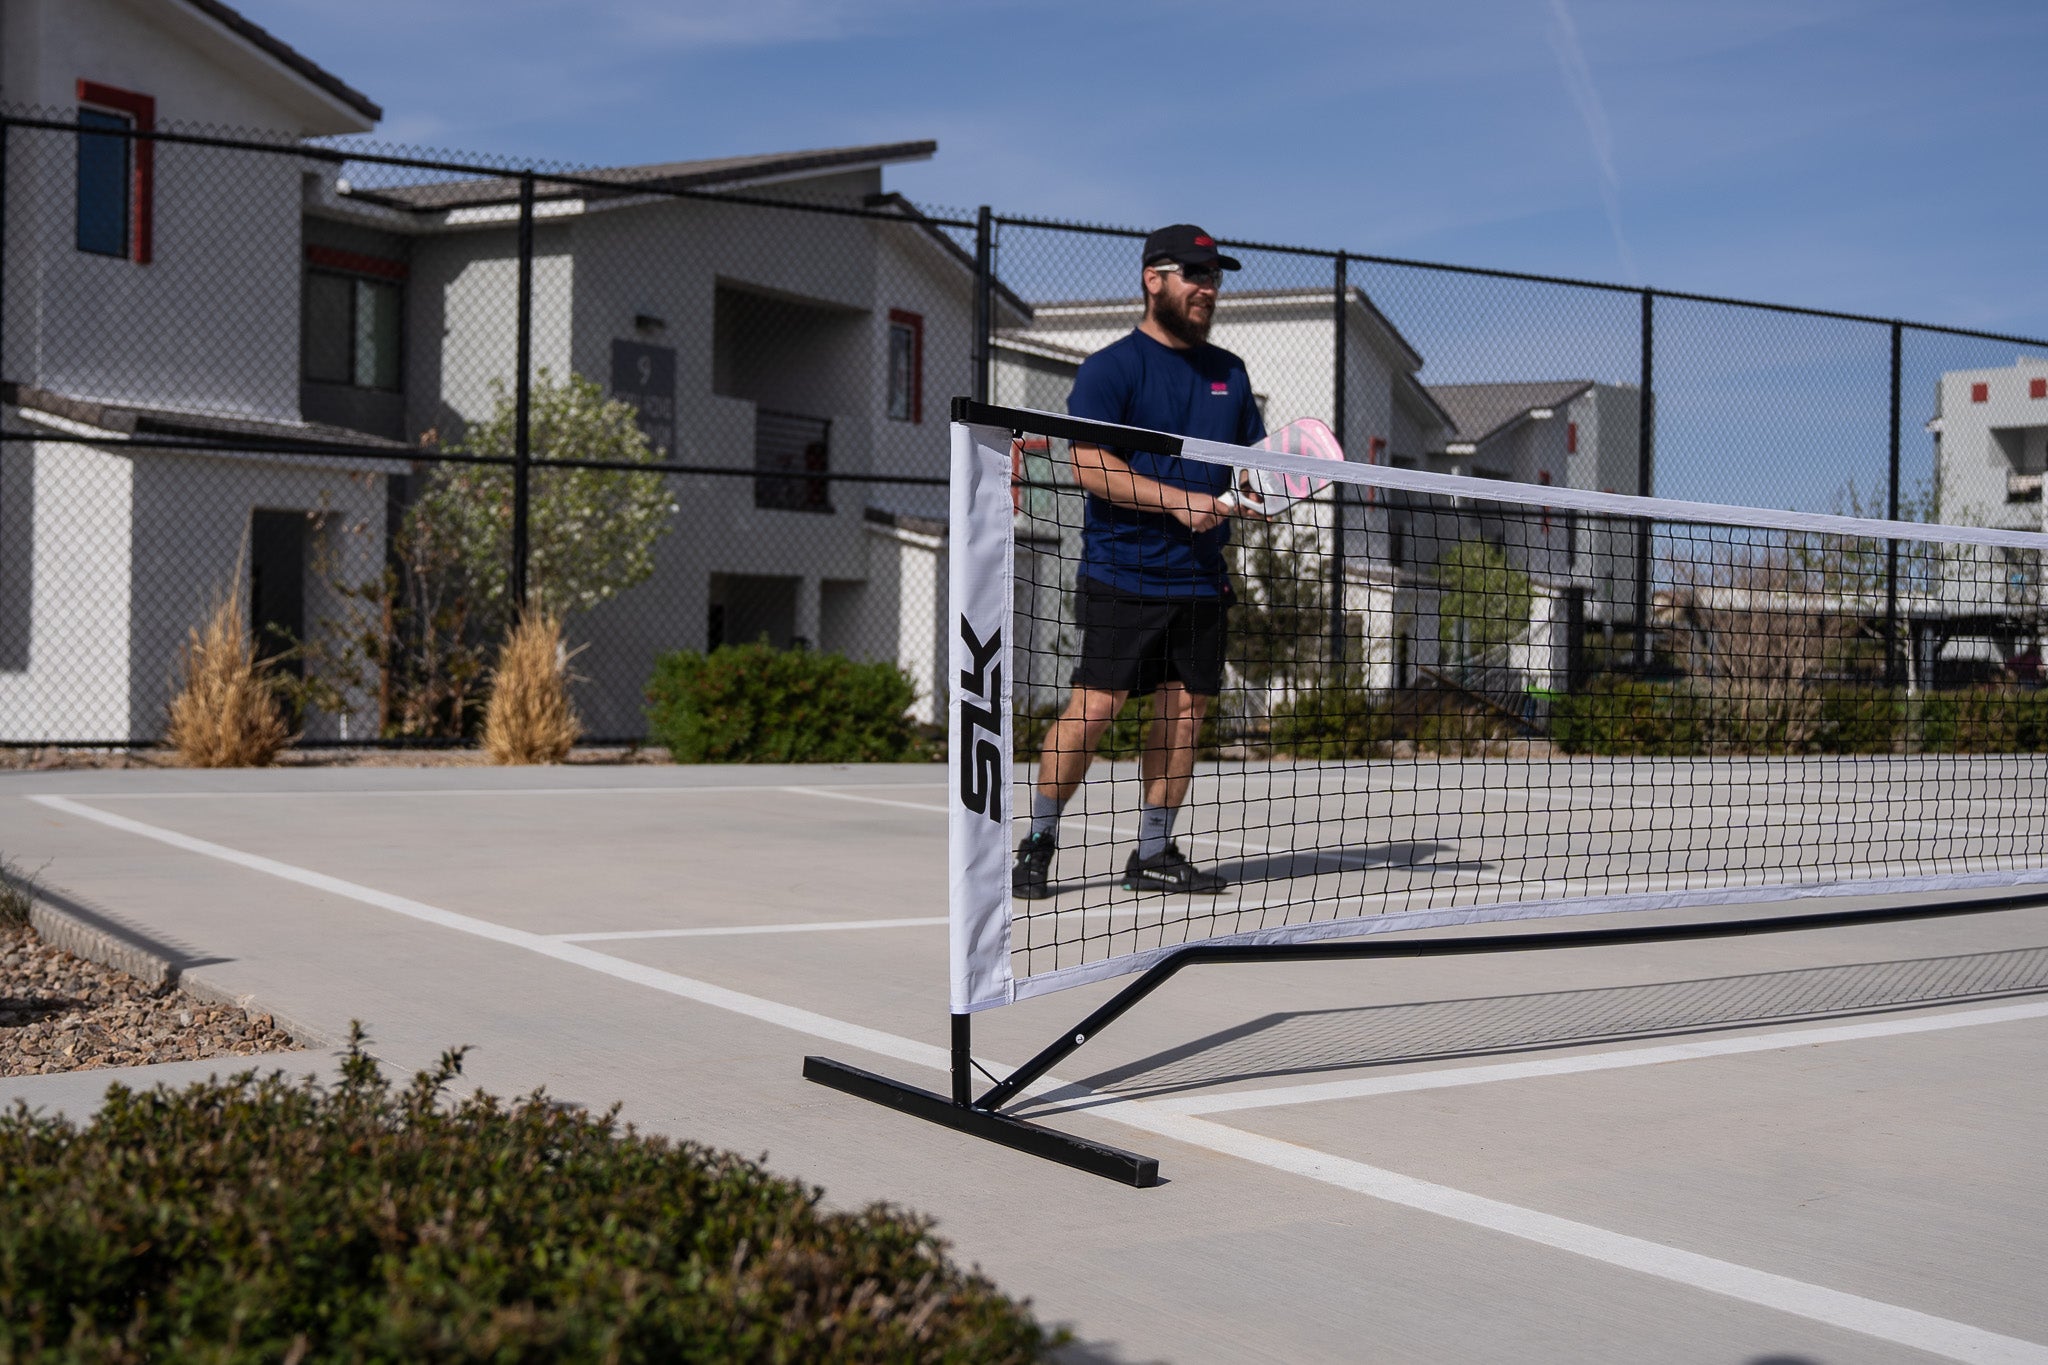 A man stands on a pickleball court behind a temporary pickleball net. He is ready to hit a volley.